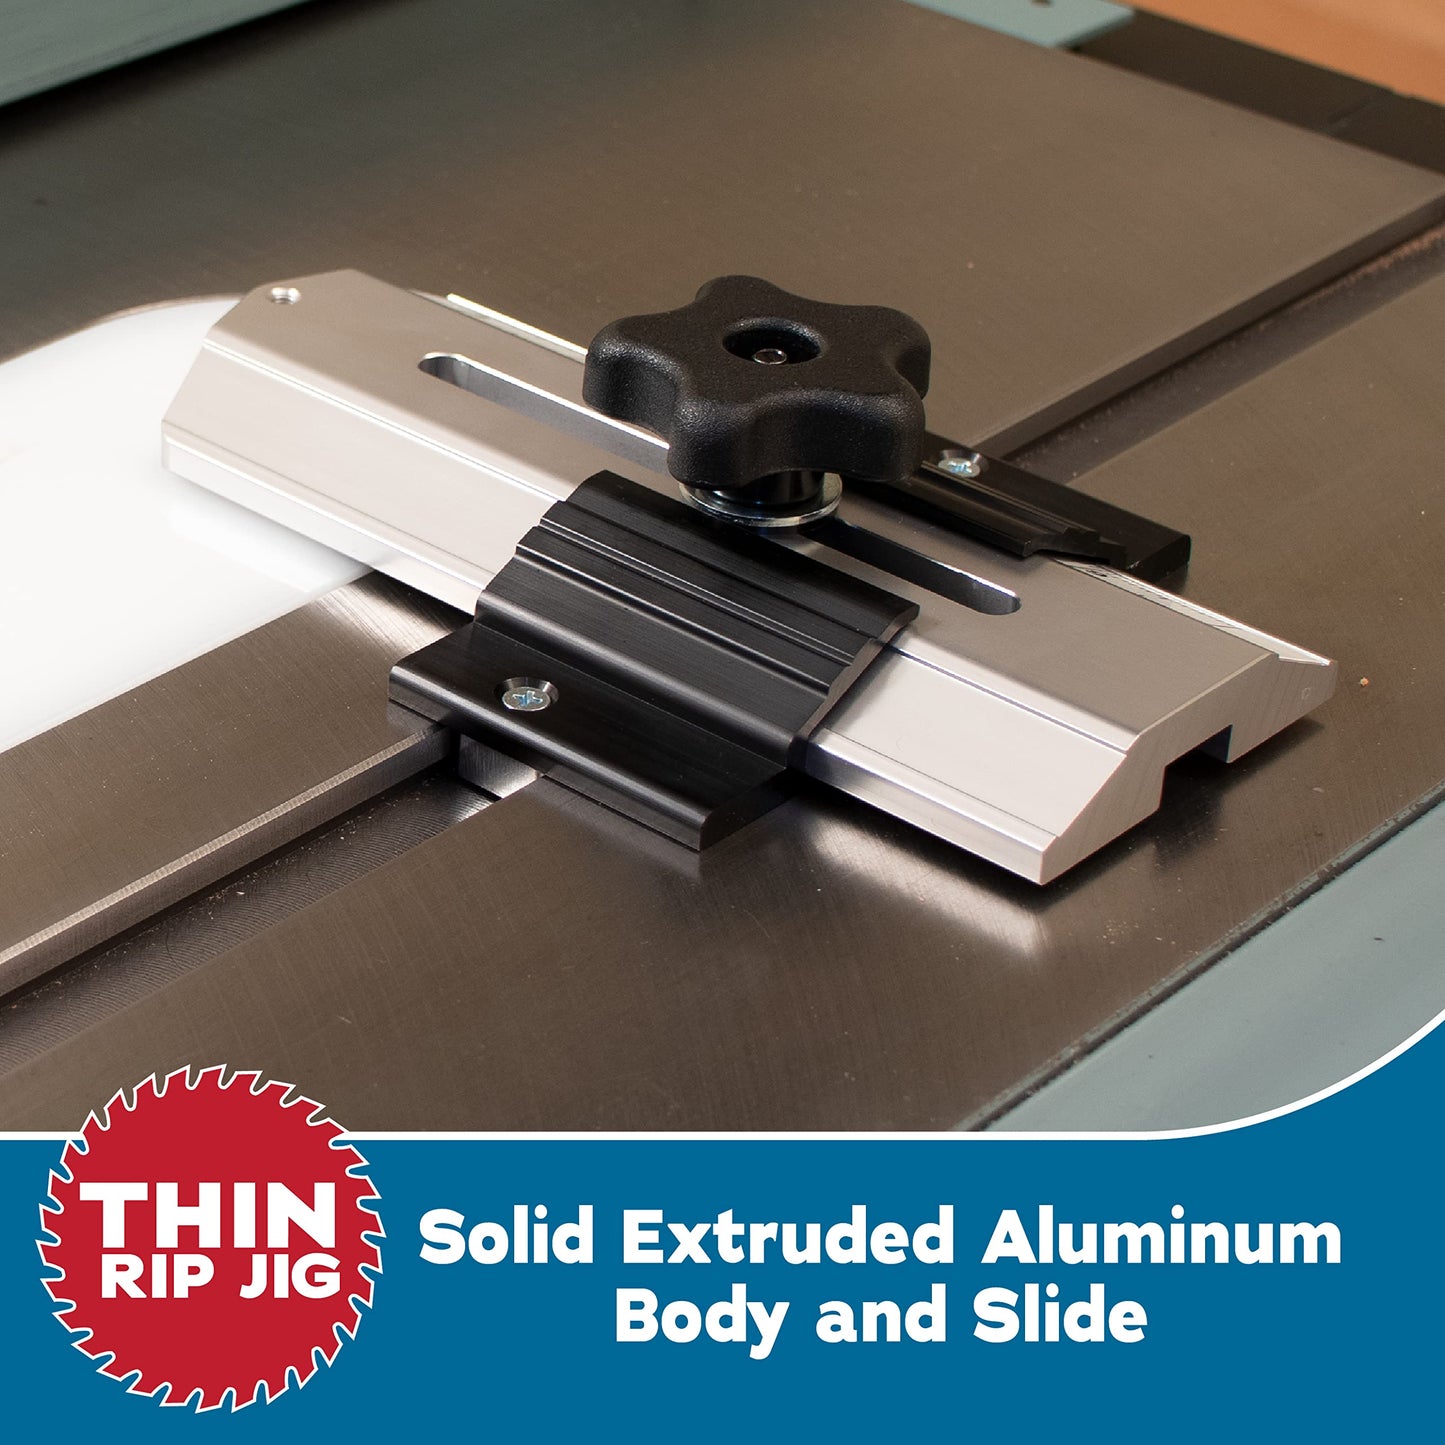 Thin Rip Jig Table Saw Jig for Making Repetitive Narrow Strip Cuts on Table Saws with 3/4" x 3/8" Miter Slots • Also Works with Many Router Tables